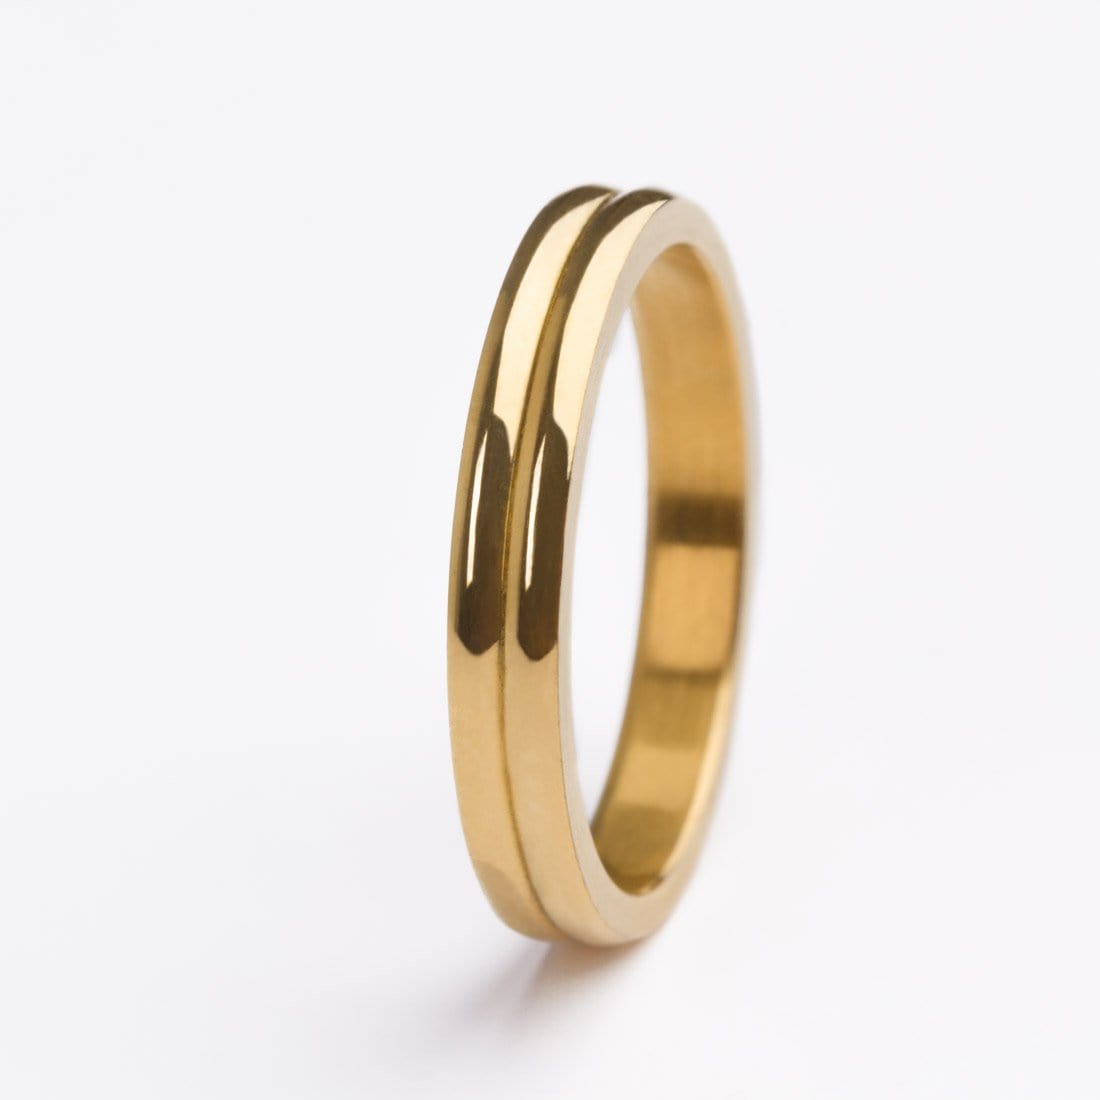 Amy Gold Ring